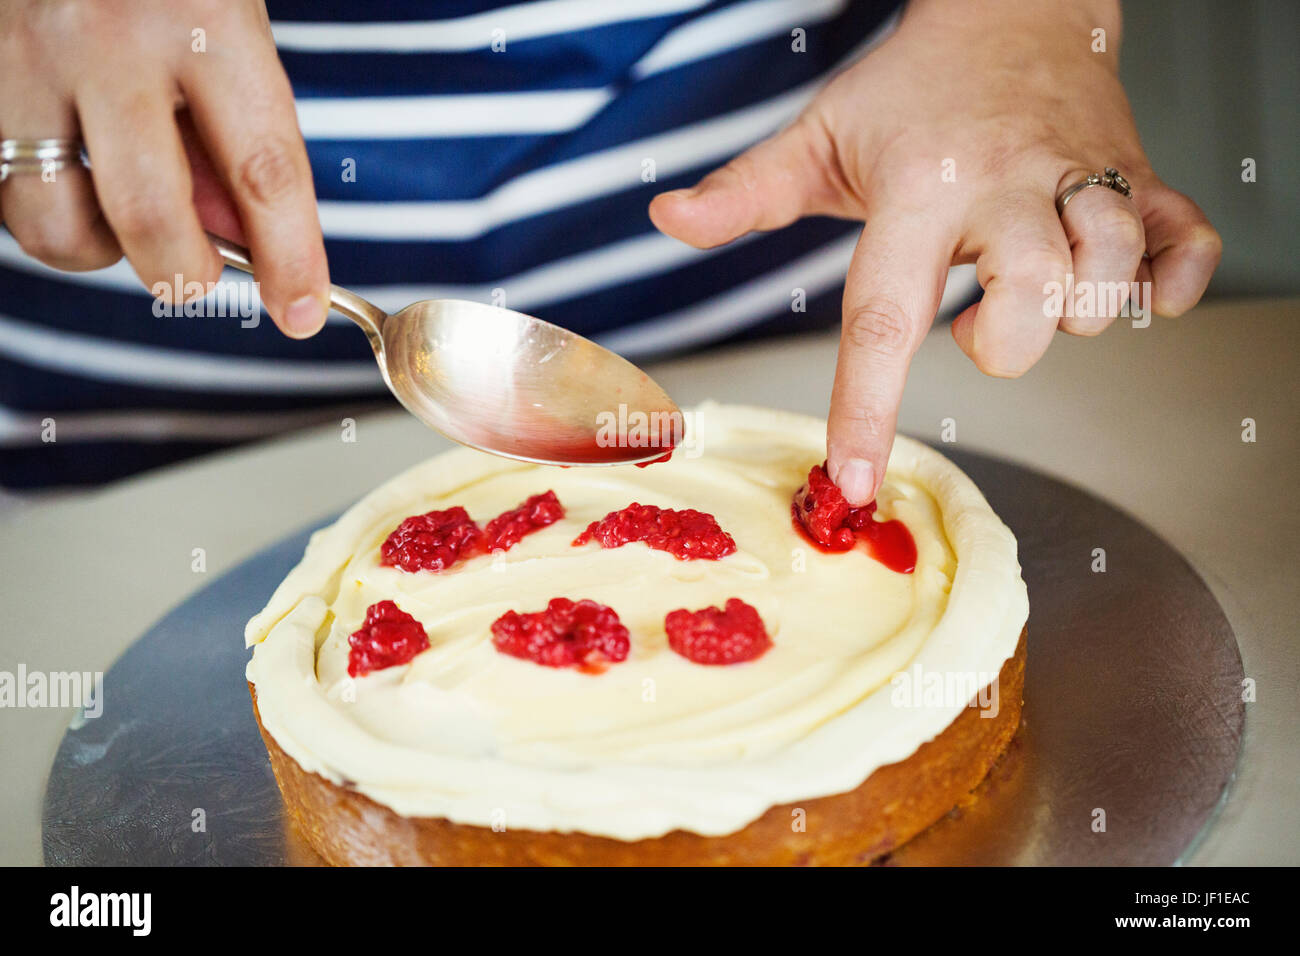 Close up high angle view of person wearing a blue and white stripy apron assembling a layer cake, holding spoon, placing raspberries on layer of cream Stock Photo